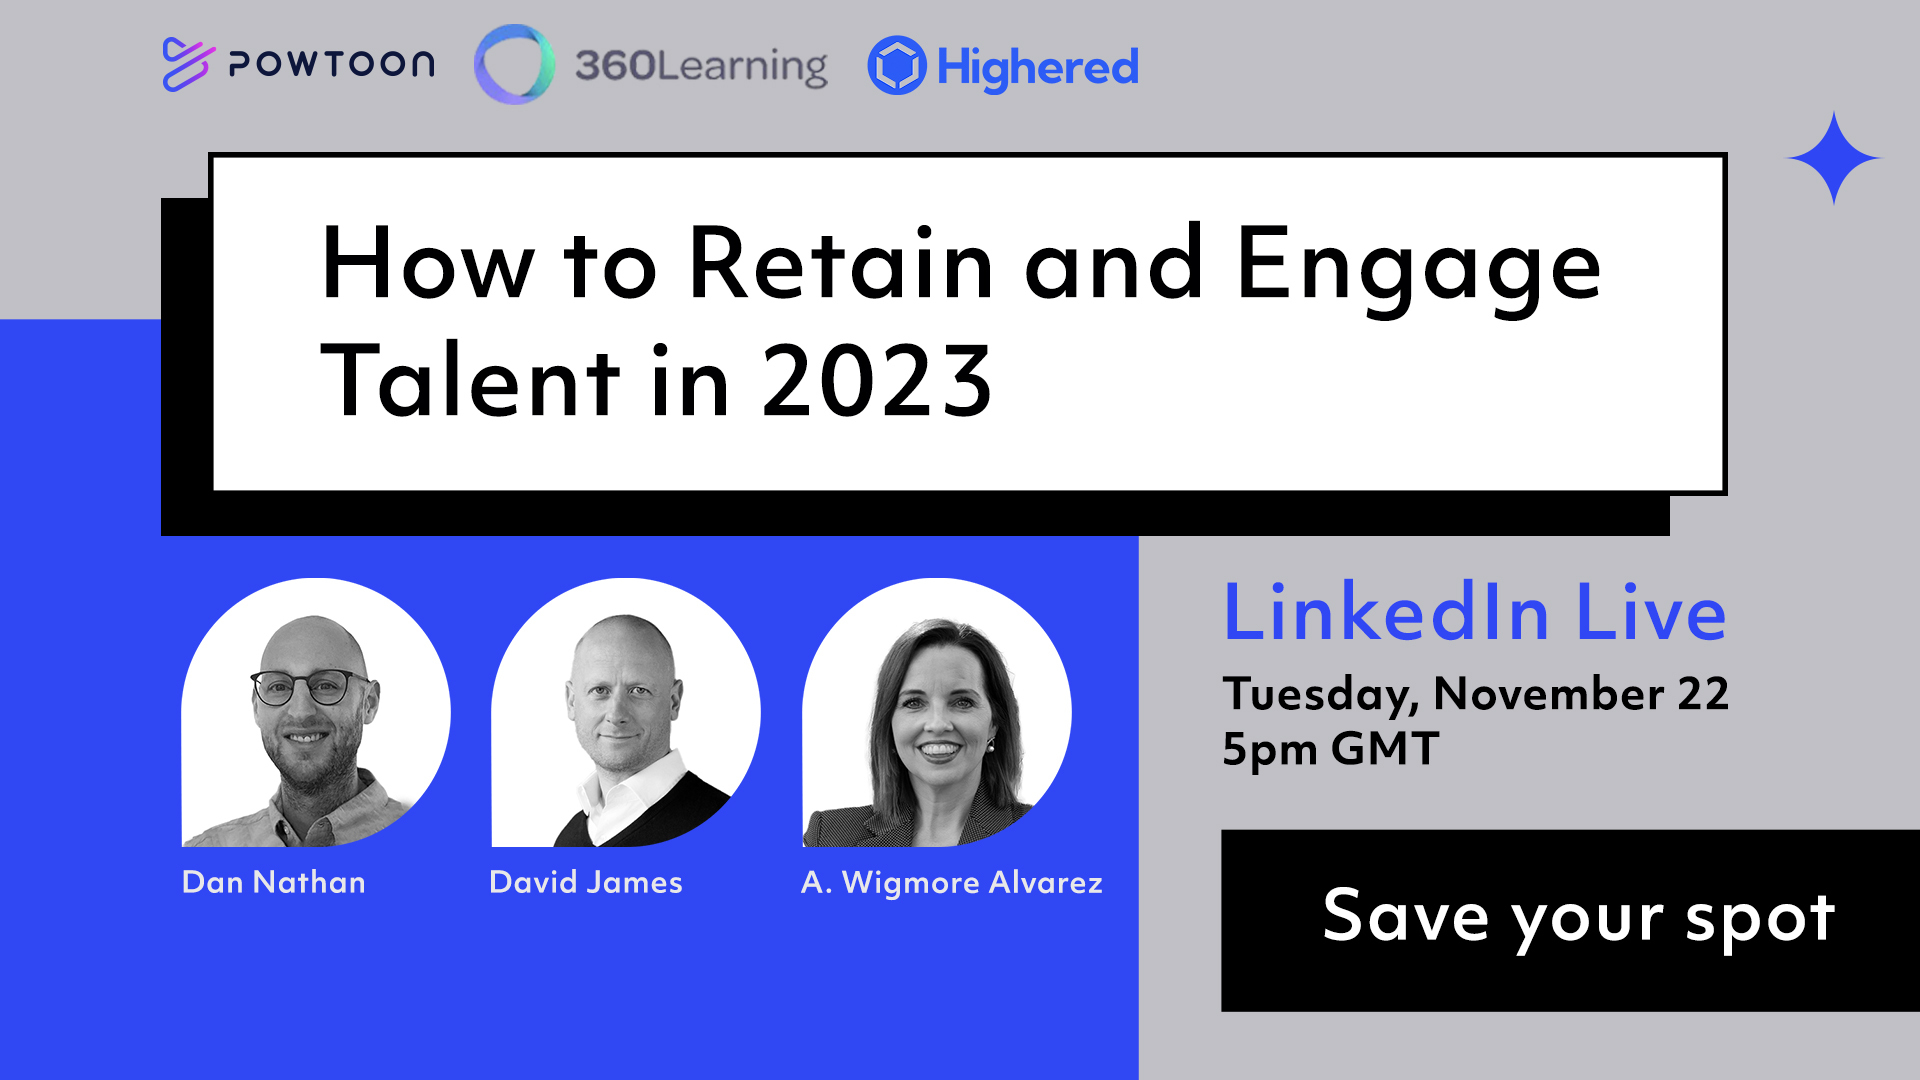 How to Retain and Engage Talent in 2023_cover (1).jpg